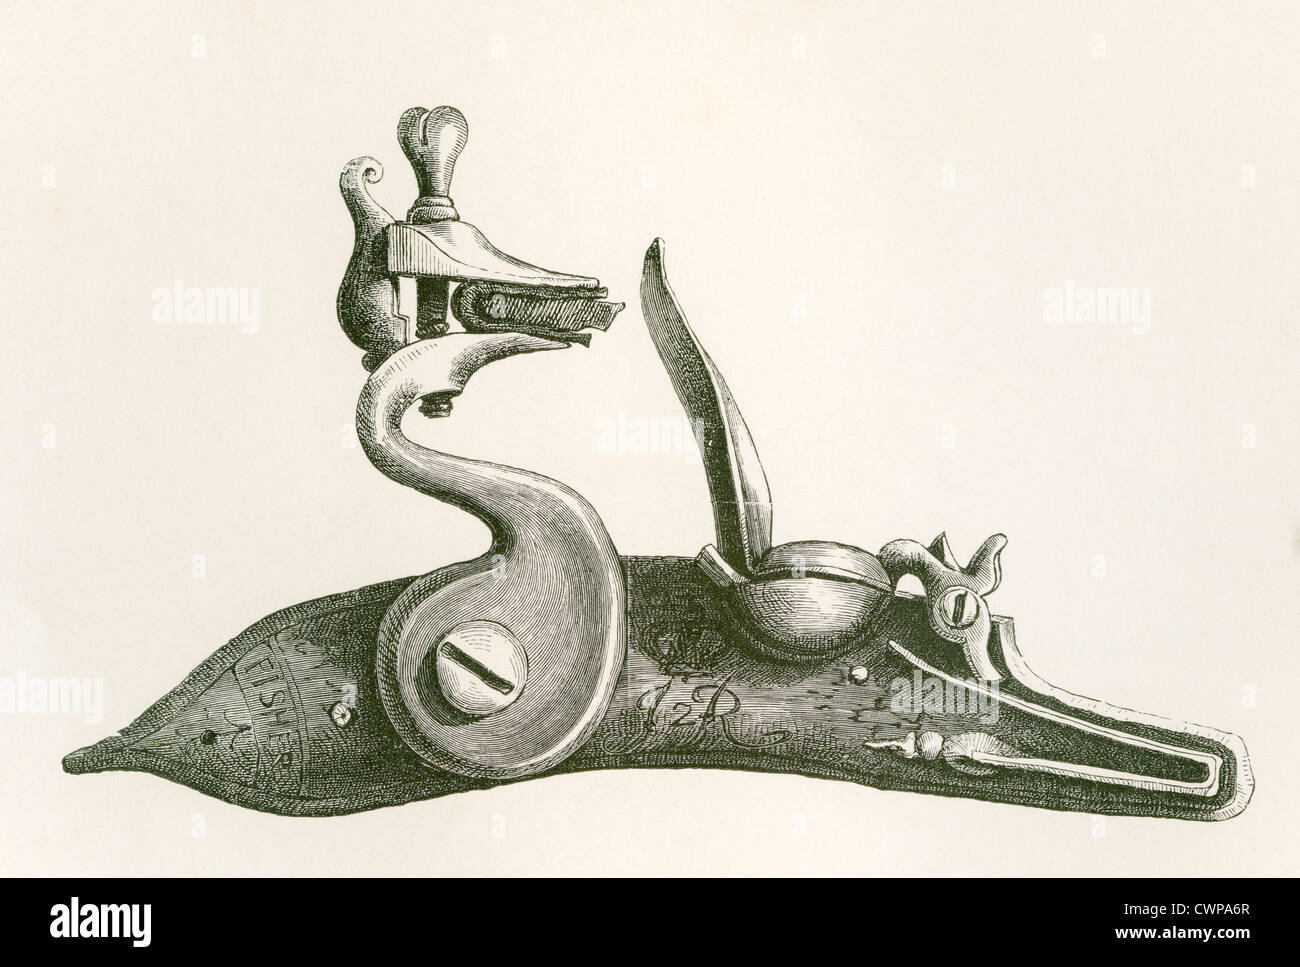 17th century Regulation Lock. From The British Army: Its Origins, Progress and Equipment, published 1868. Stock Photo